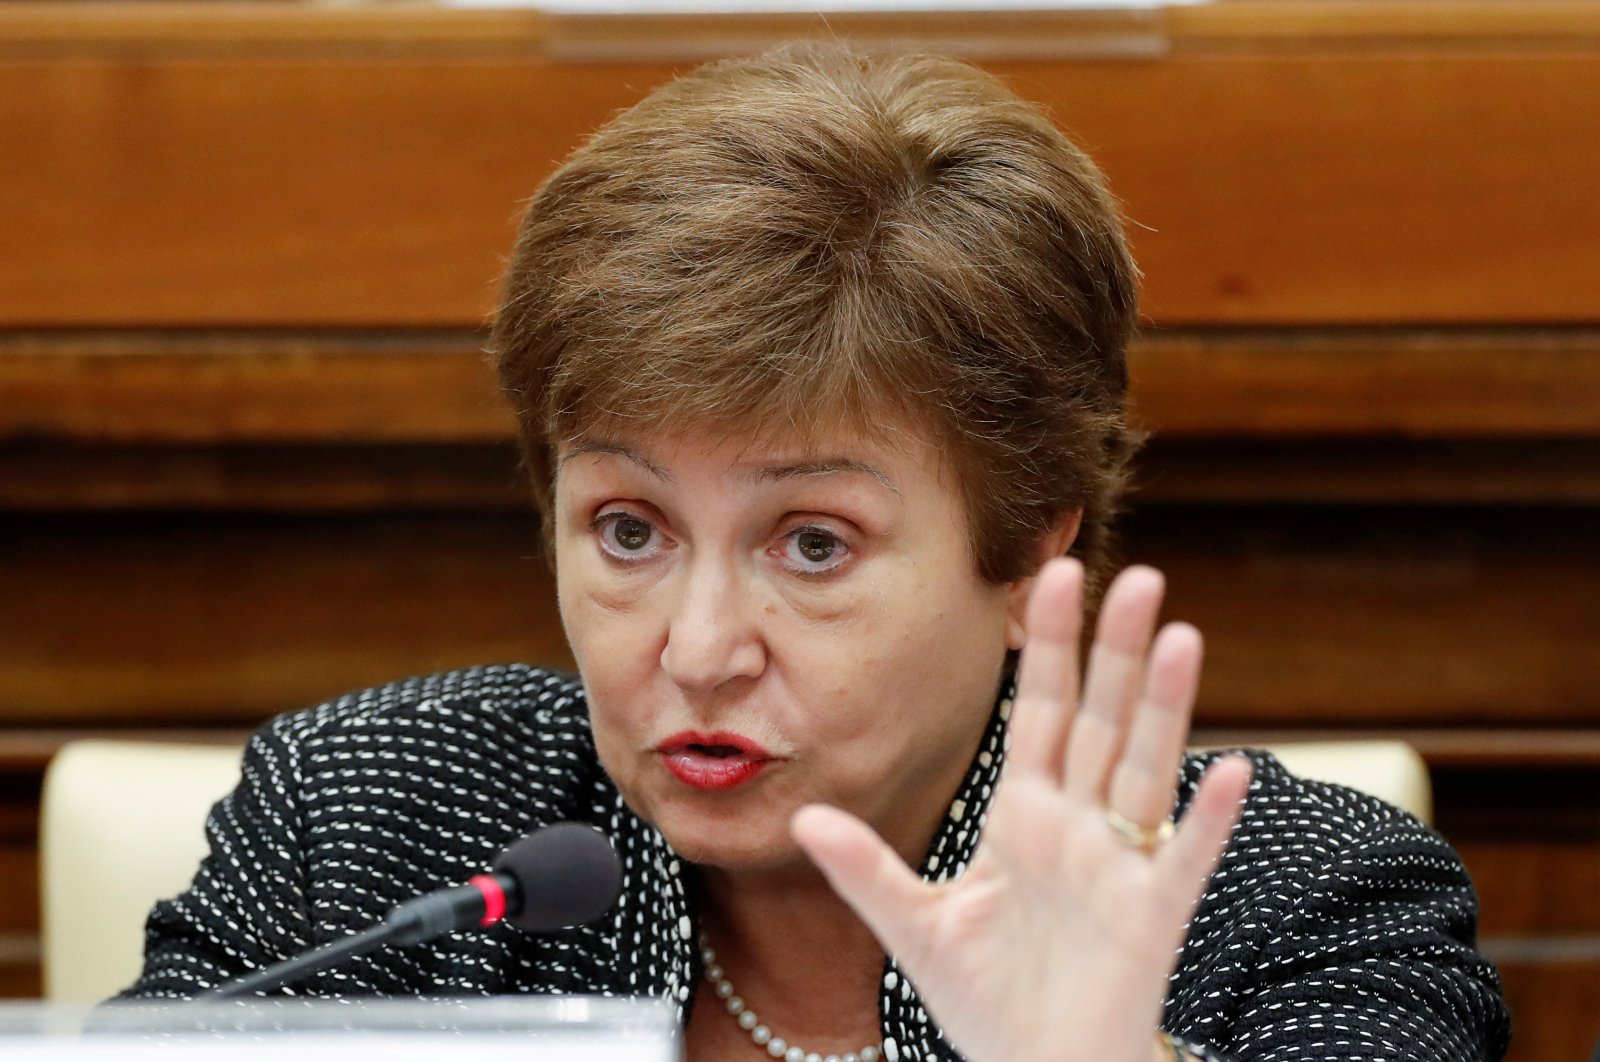 IMF Managing Director Kristalina Georgieva speaks during a conference hosted by the Vatican on economic solidarity, at the Vatican, February 5, 2020. (REUTERS Photo)